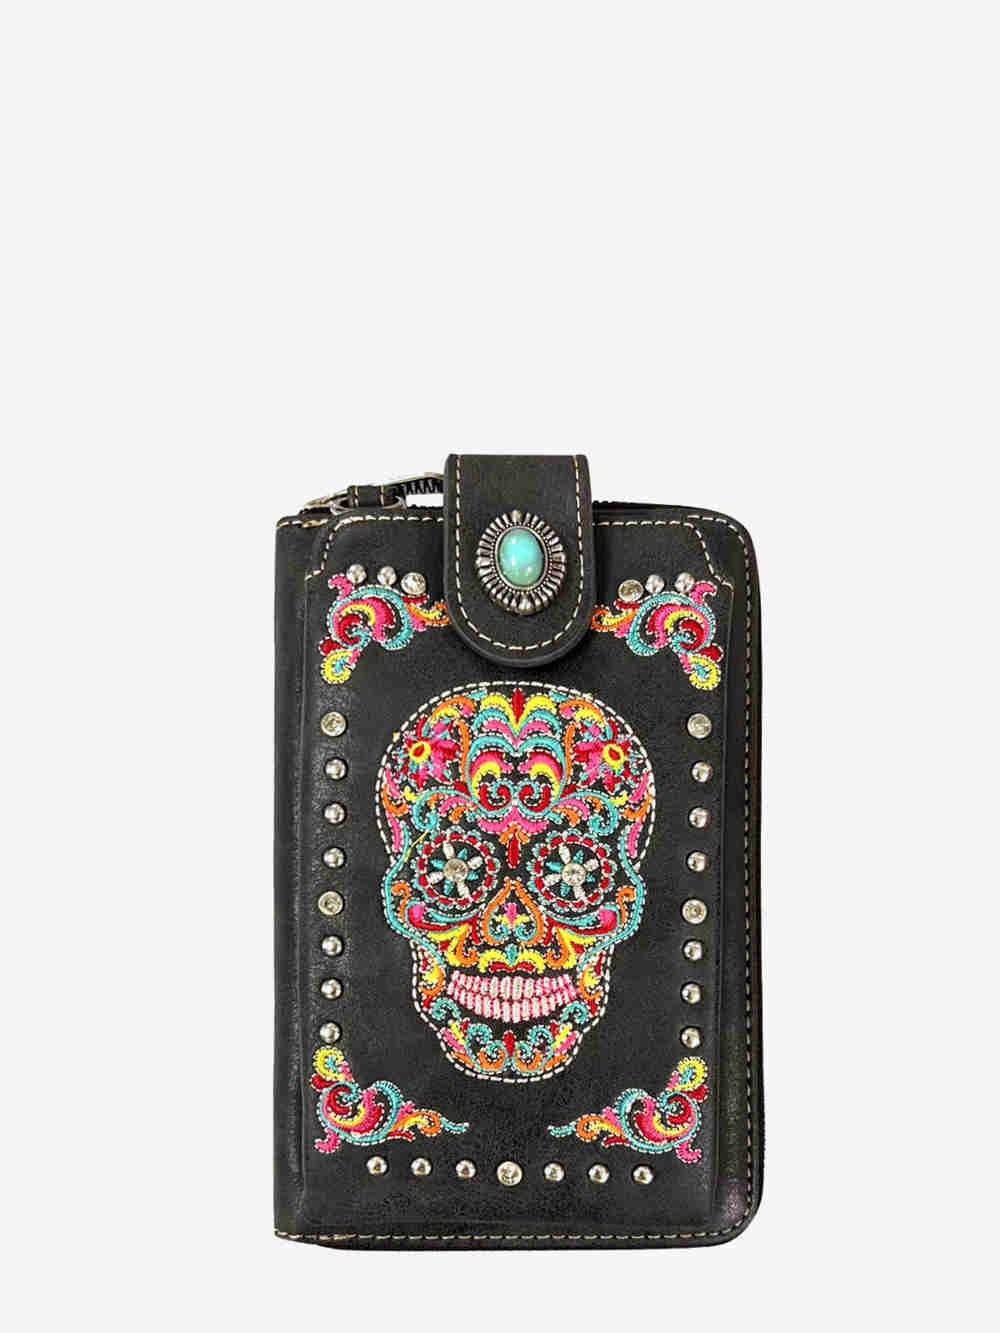 American Bling Embroidered Sugar Skull Crossbody Phone Wallet - Montana West World